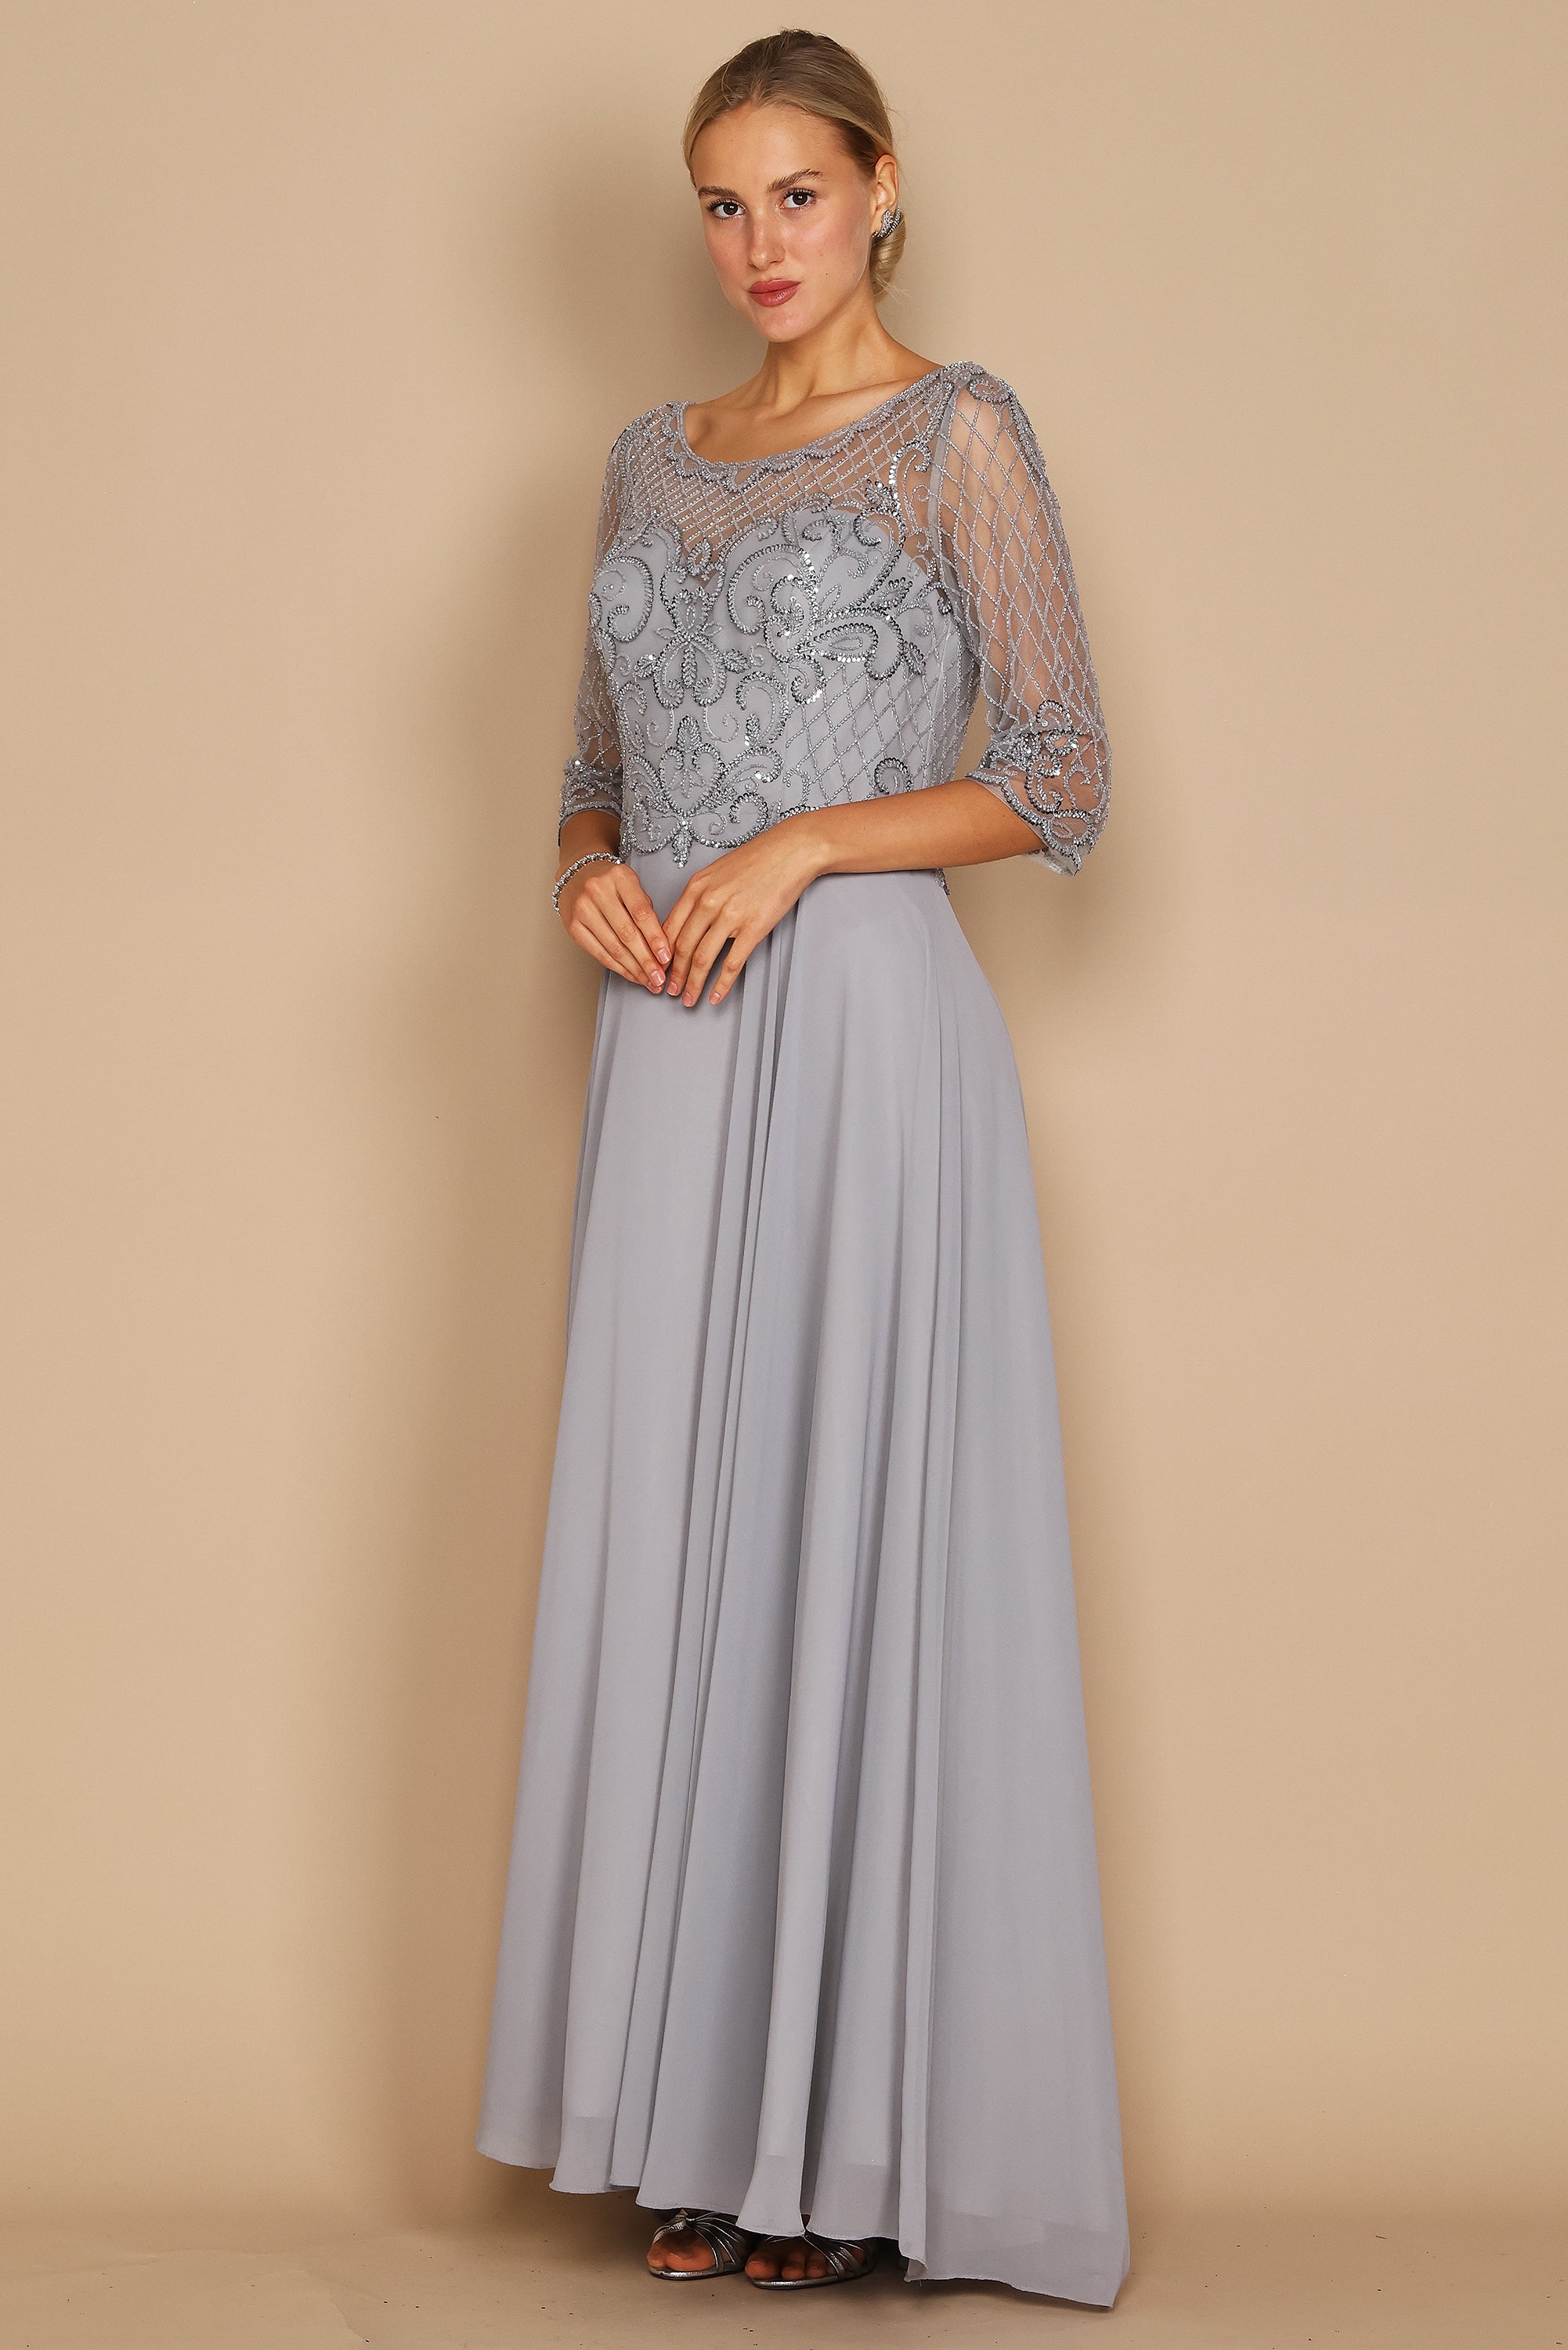 Dylan & Davids Long Sleeve Hand Beaded Mother of The Bride Dress